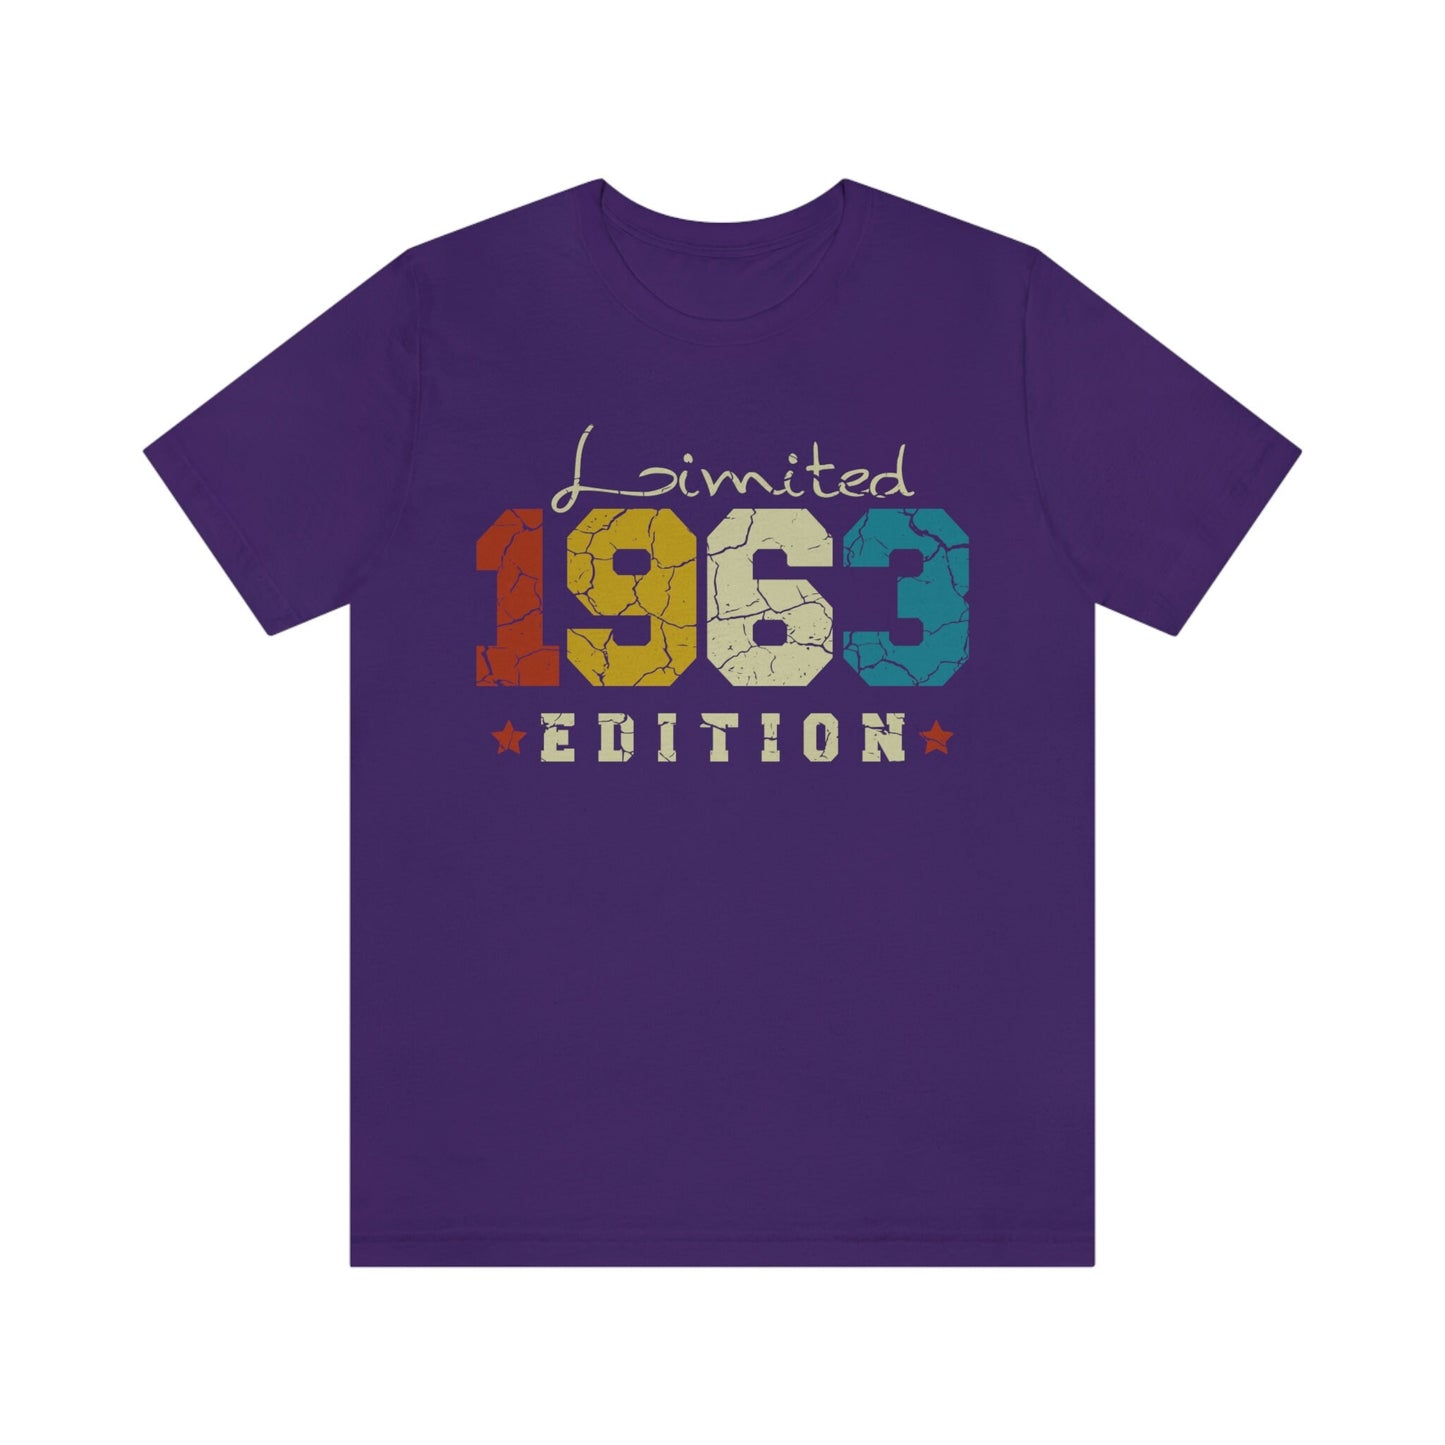 Limited 1963 Edition birthday shirt for women or men, Gift shirt for wife or husband